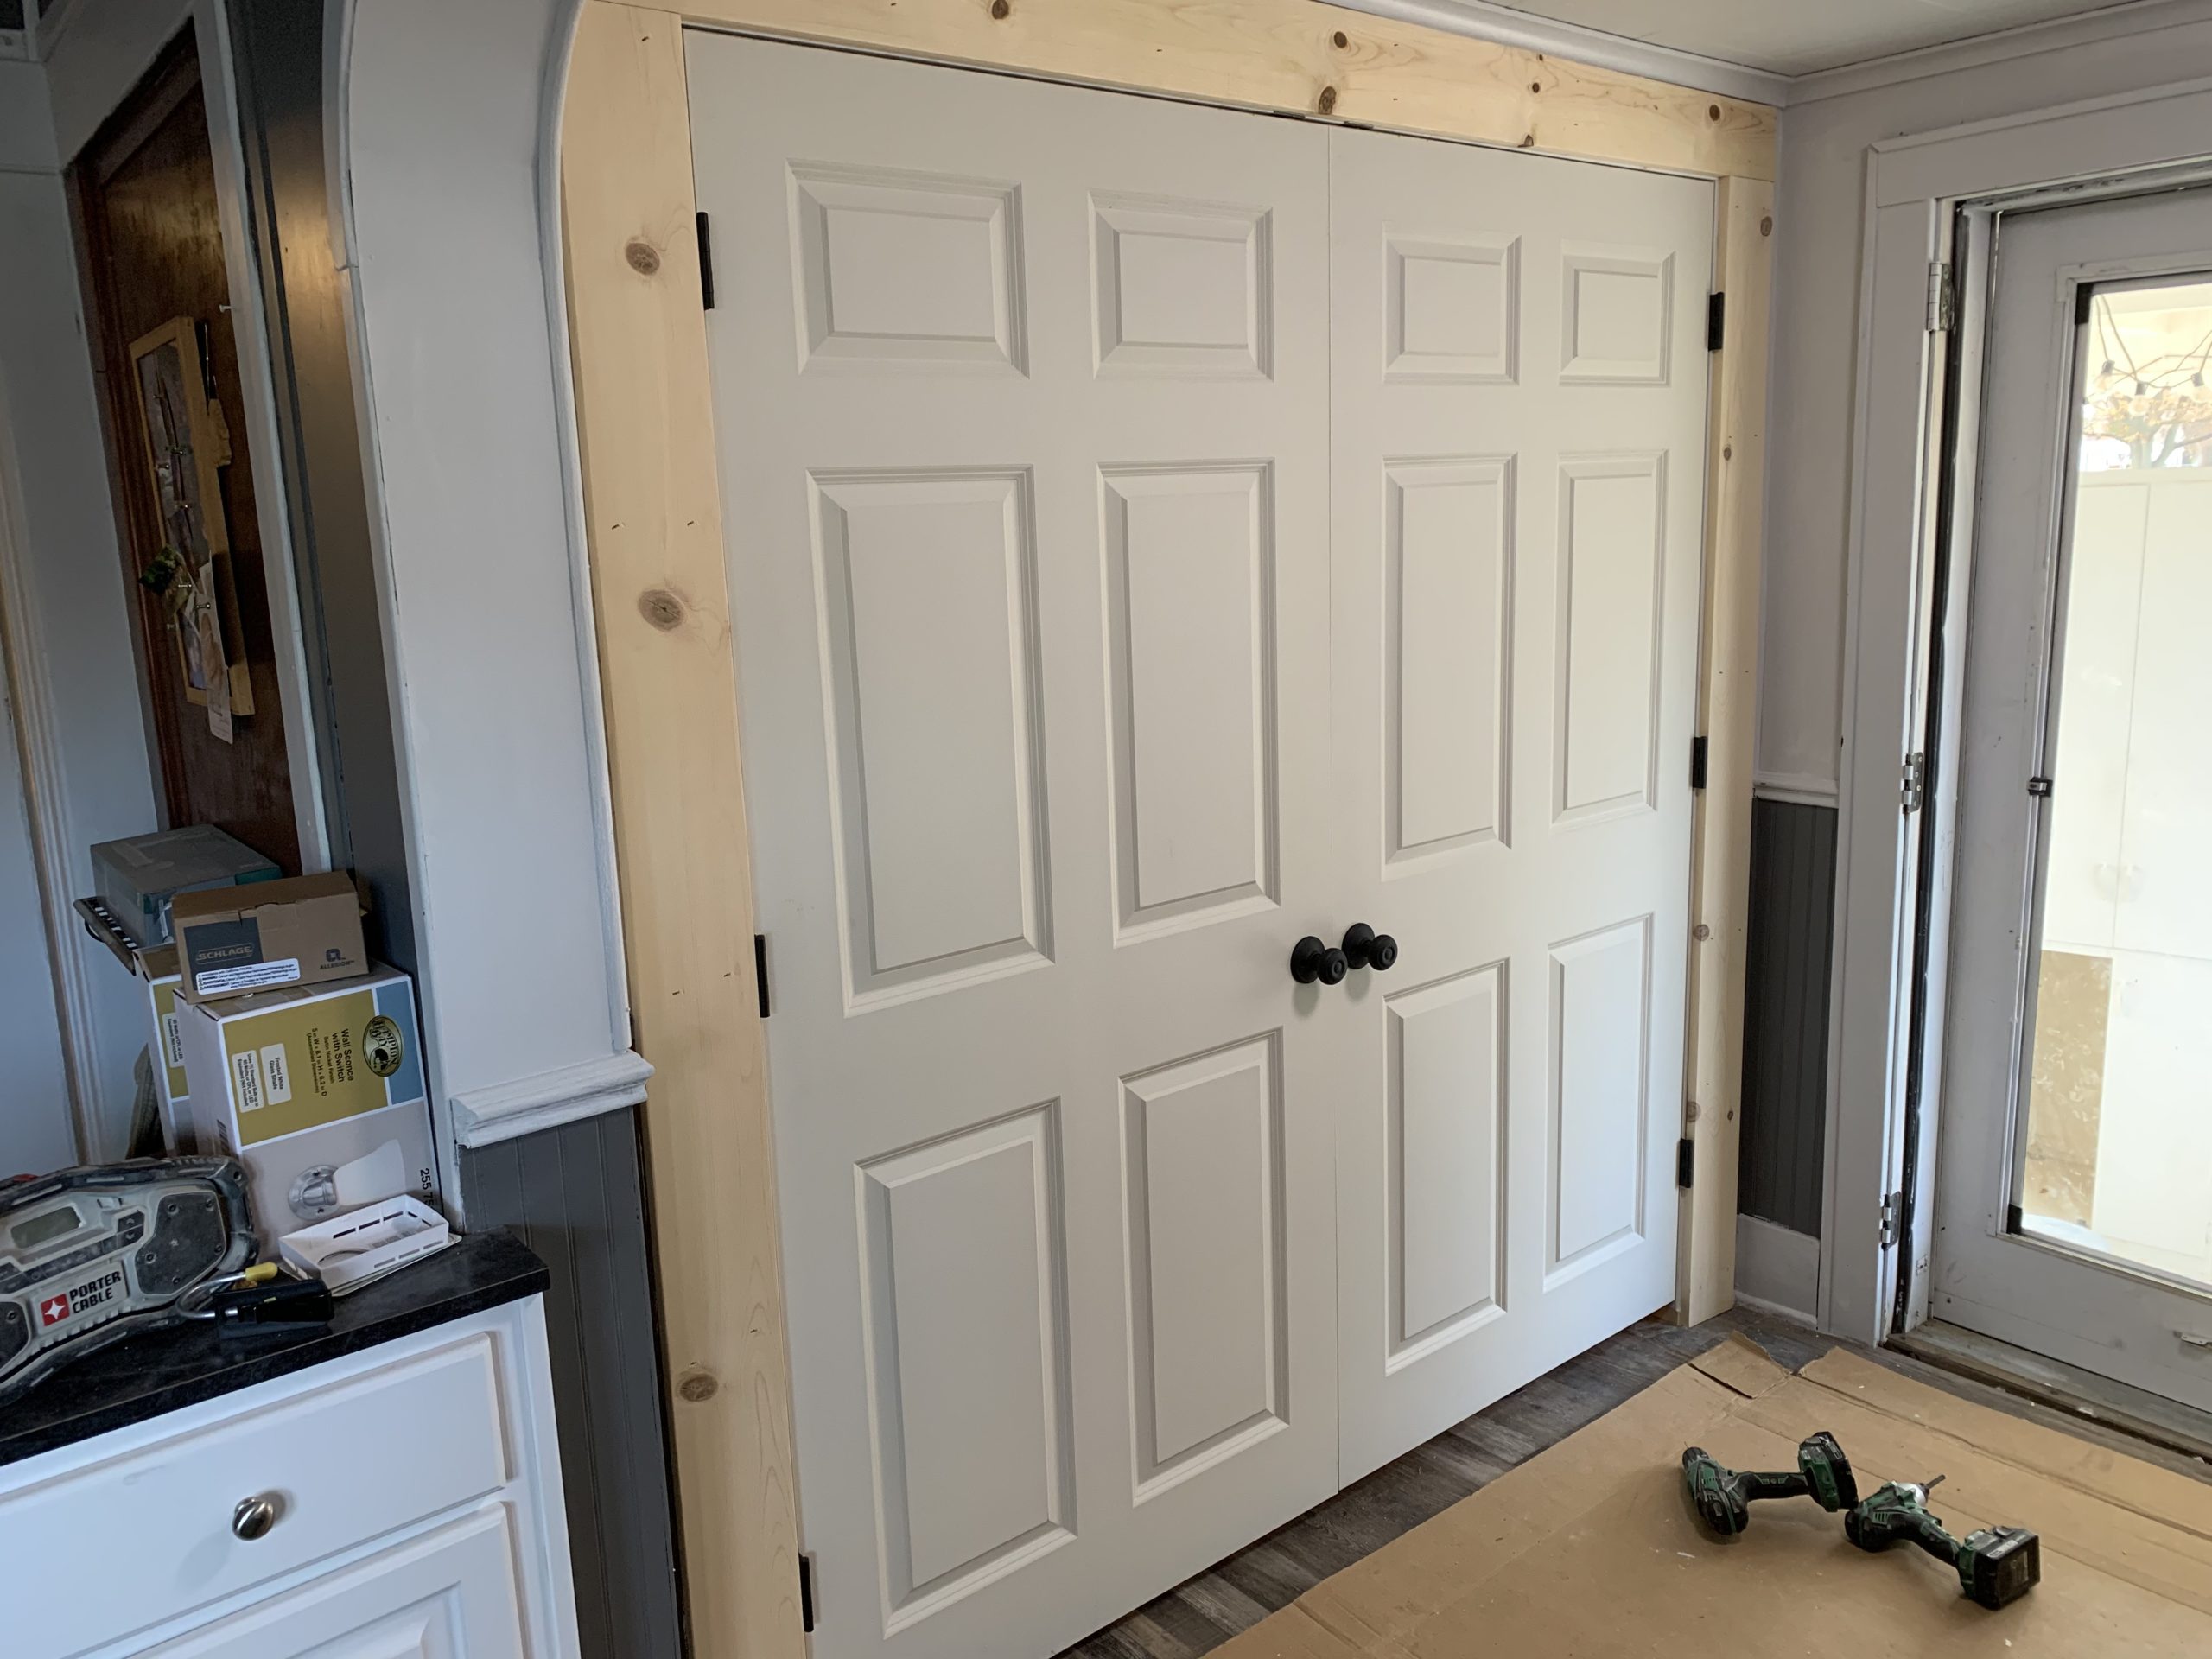 How can I add a closet to an existing room?